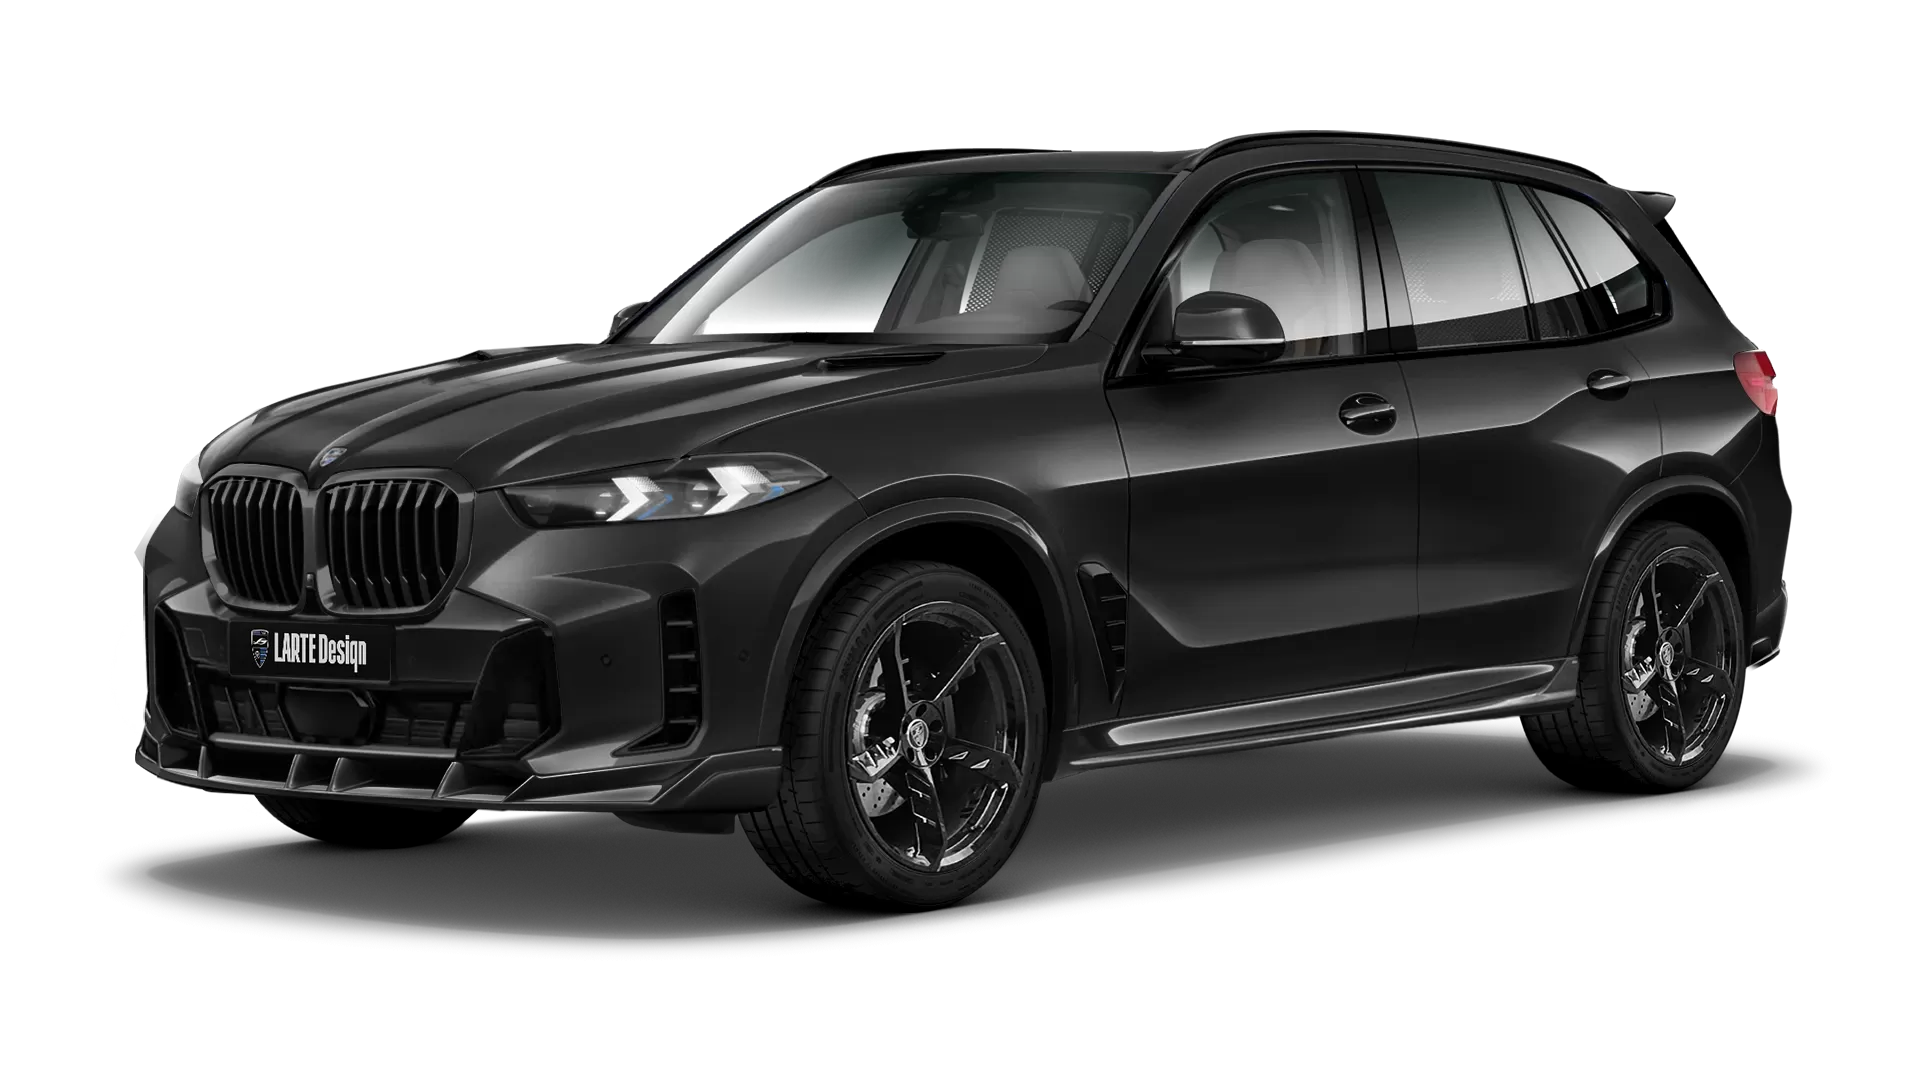 BMW X5 G05 LCI Facelift with painted body kit: front view shown in Sapphire Black